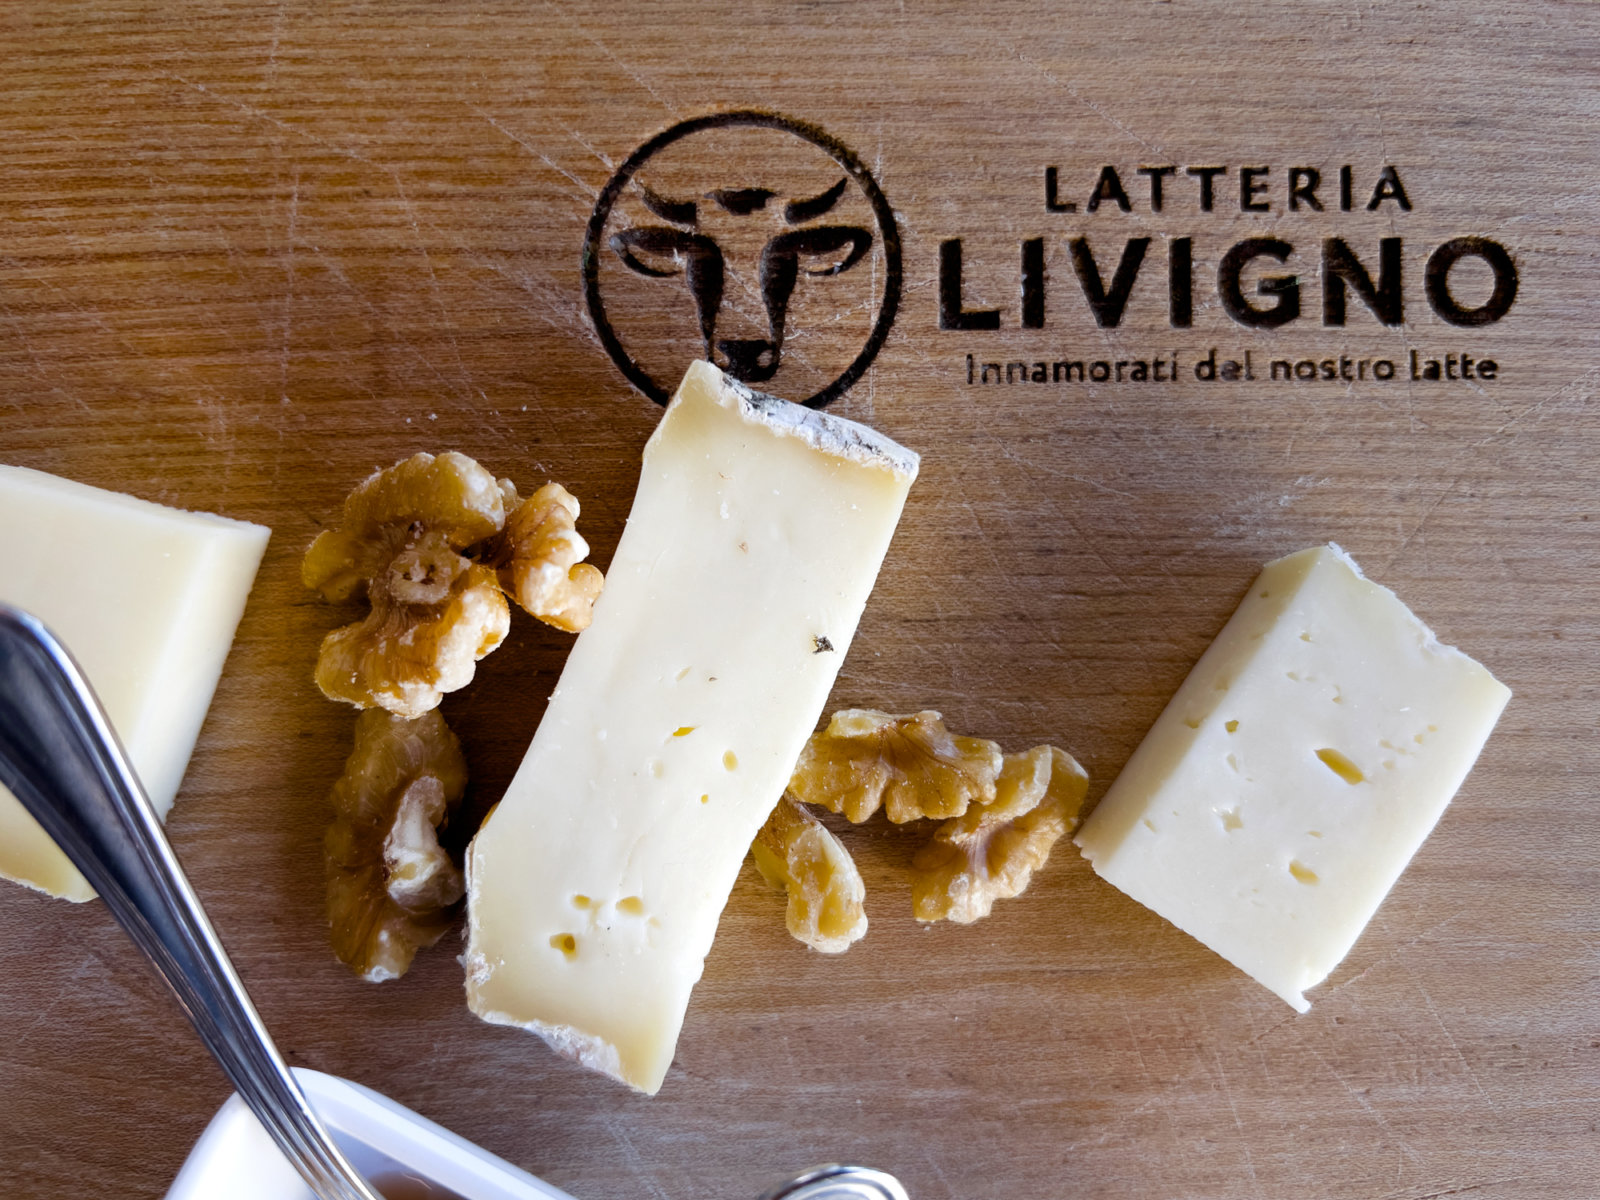 A platter of cheese at the Latteria di Livigno Cheese Dairy in Livigno, Italy